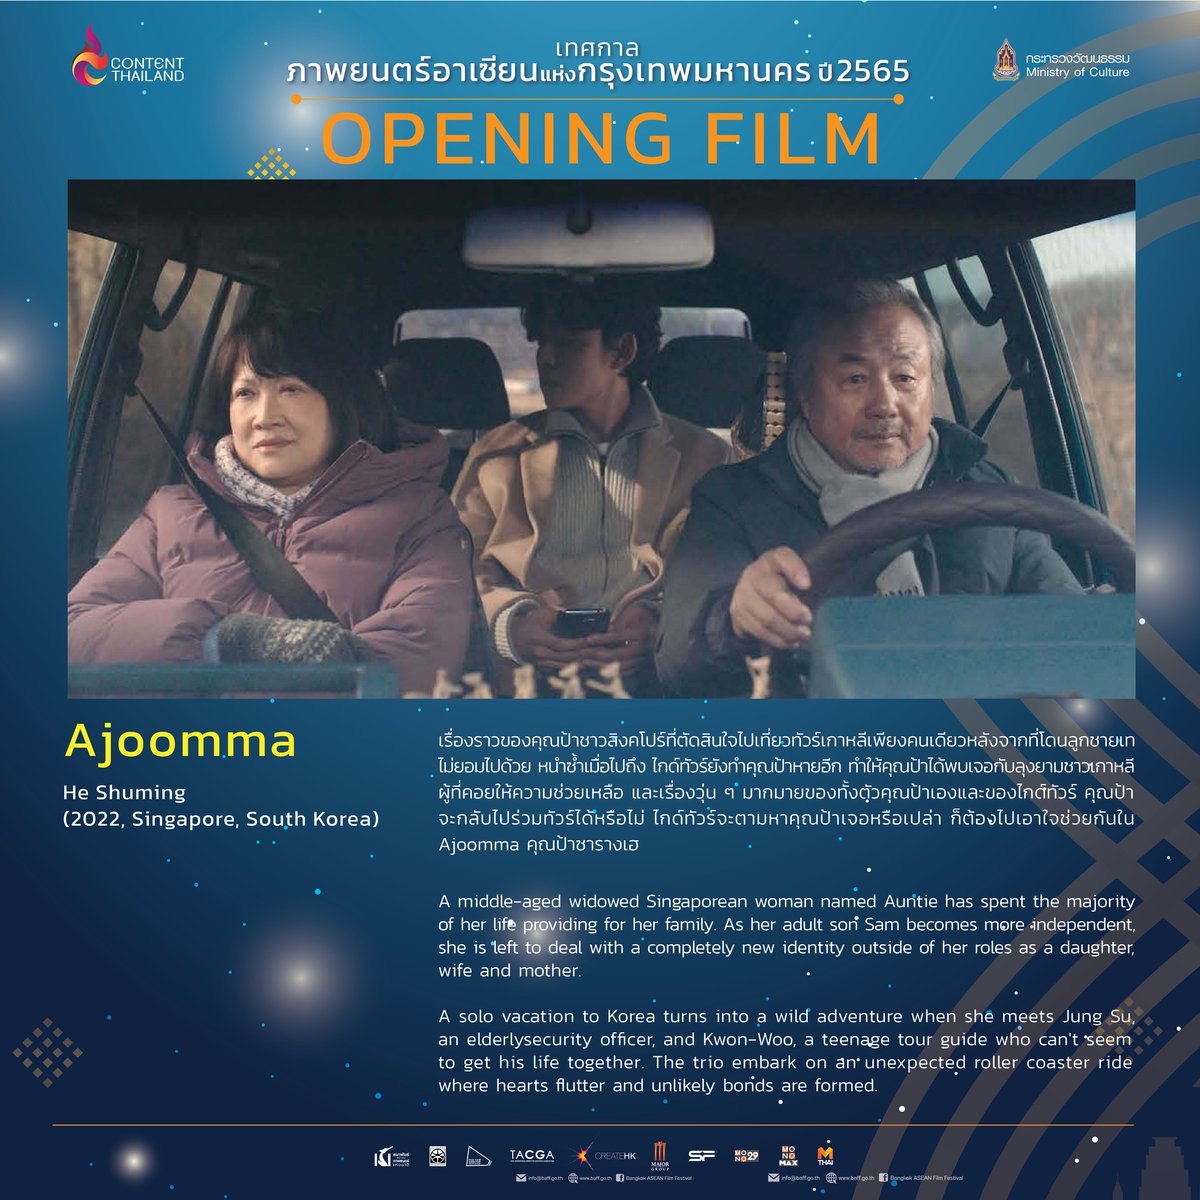 This year the #OpeningFilm of the #BAFF2022 is #Ajoomma (2022), a Singaporean-South Korean drama comedy film. Also the debut feature film by an award-winning Singaporean director He Shuming. The film will be screened on 20.1.2023 at 8:00 PM at #ParagonCineplex, Siam Paragon.